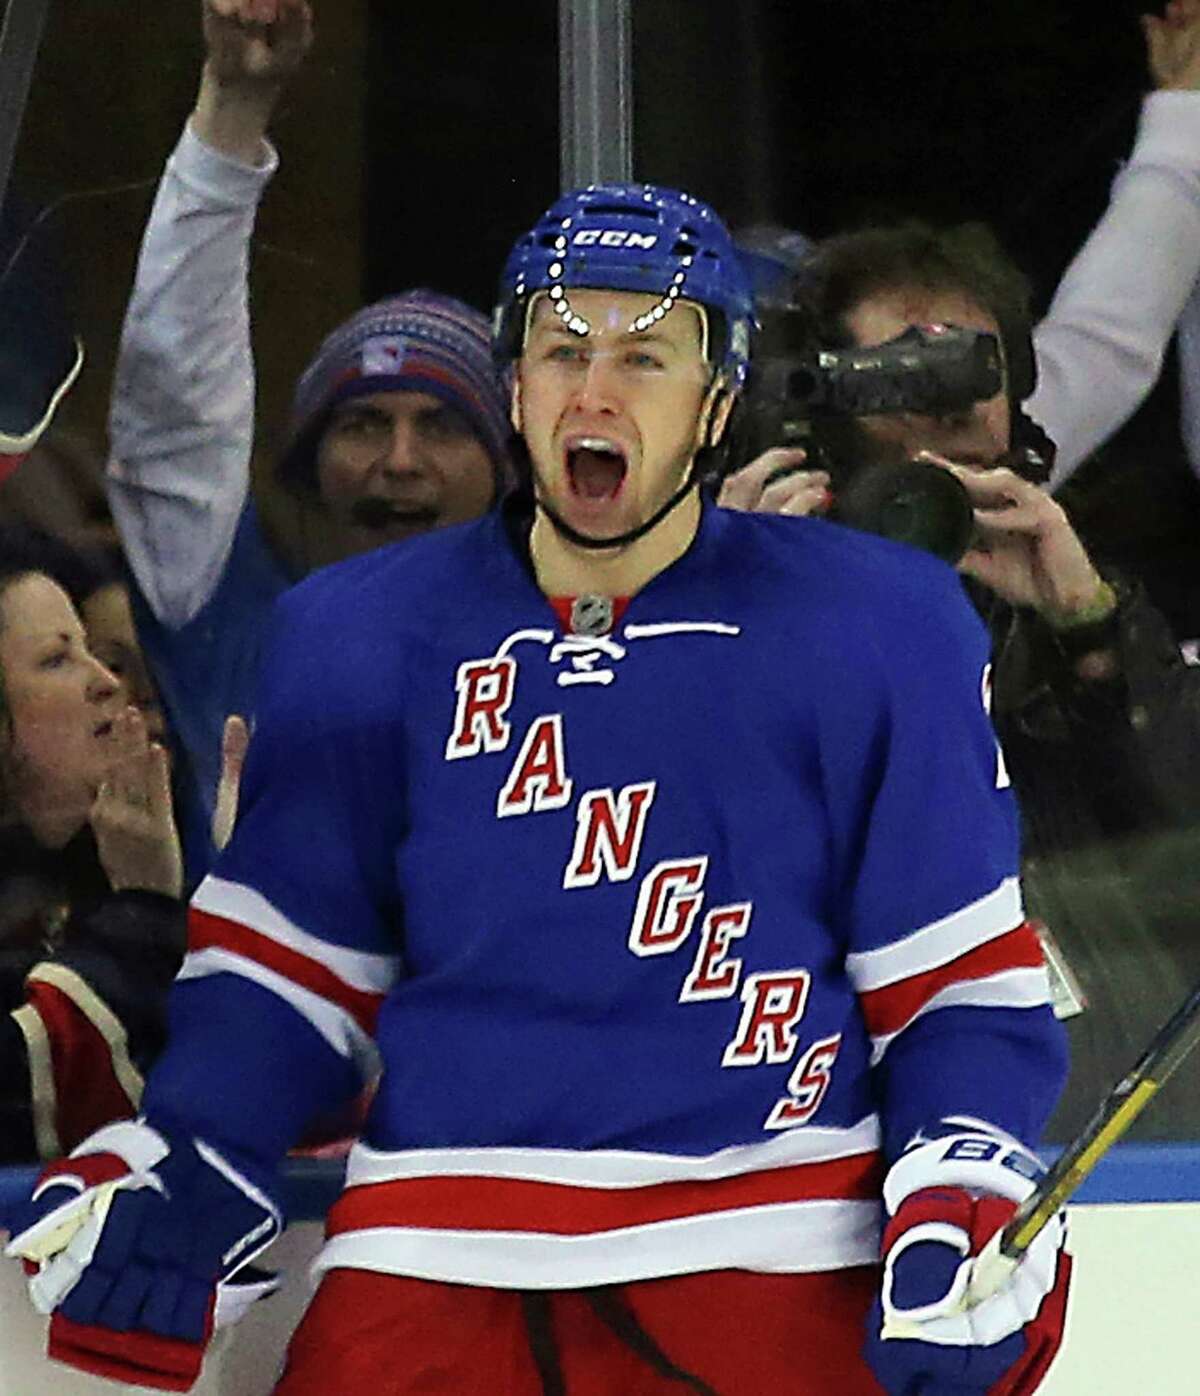 NEW YORK, NY - APRIL 01: Derek Stepan #21 of the New York Rangers celebrates his score at 19 seconds of the first period against the Winnipeg Jets at Madison Square Garden on April 1, 2013 in New York City. The Rangers defeated the Jets 4-2 as Stefan scored two. (Photo by Bruce Bennett/Getty Images)